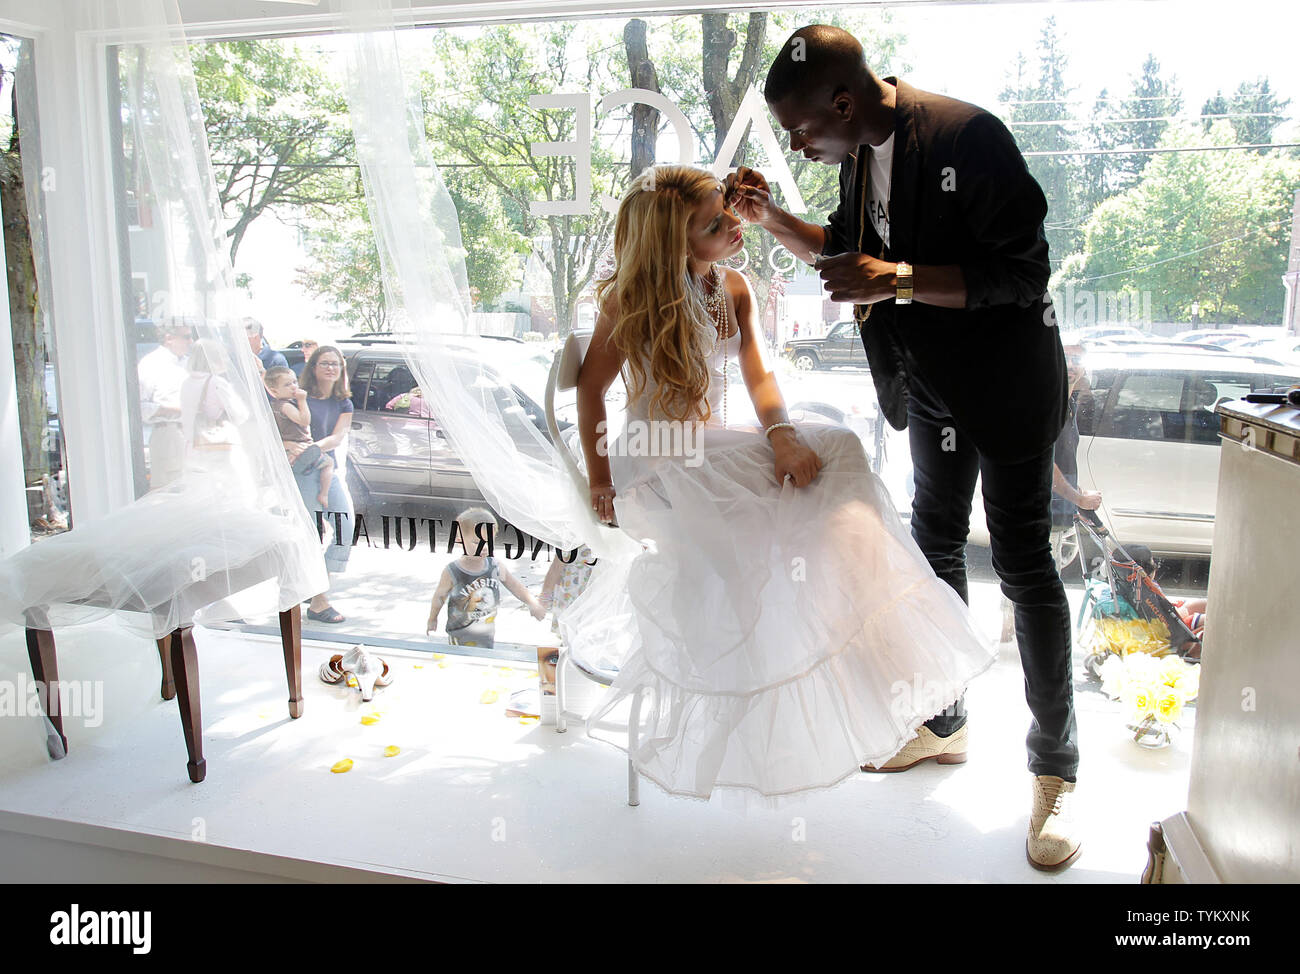 Chelsea Clinton Wedding High Resolution Stock Photography And Images Alamy